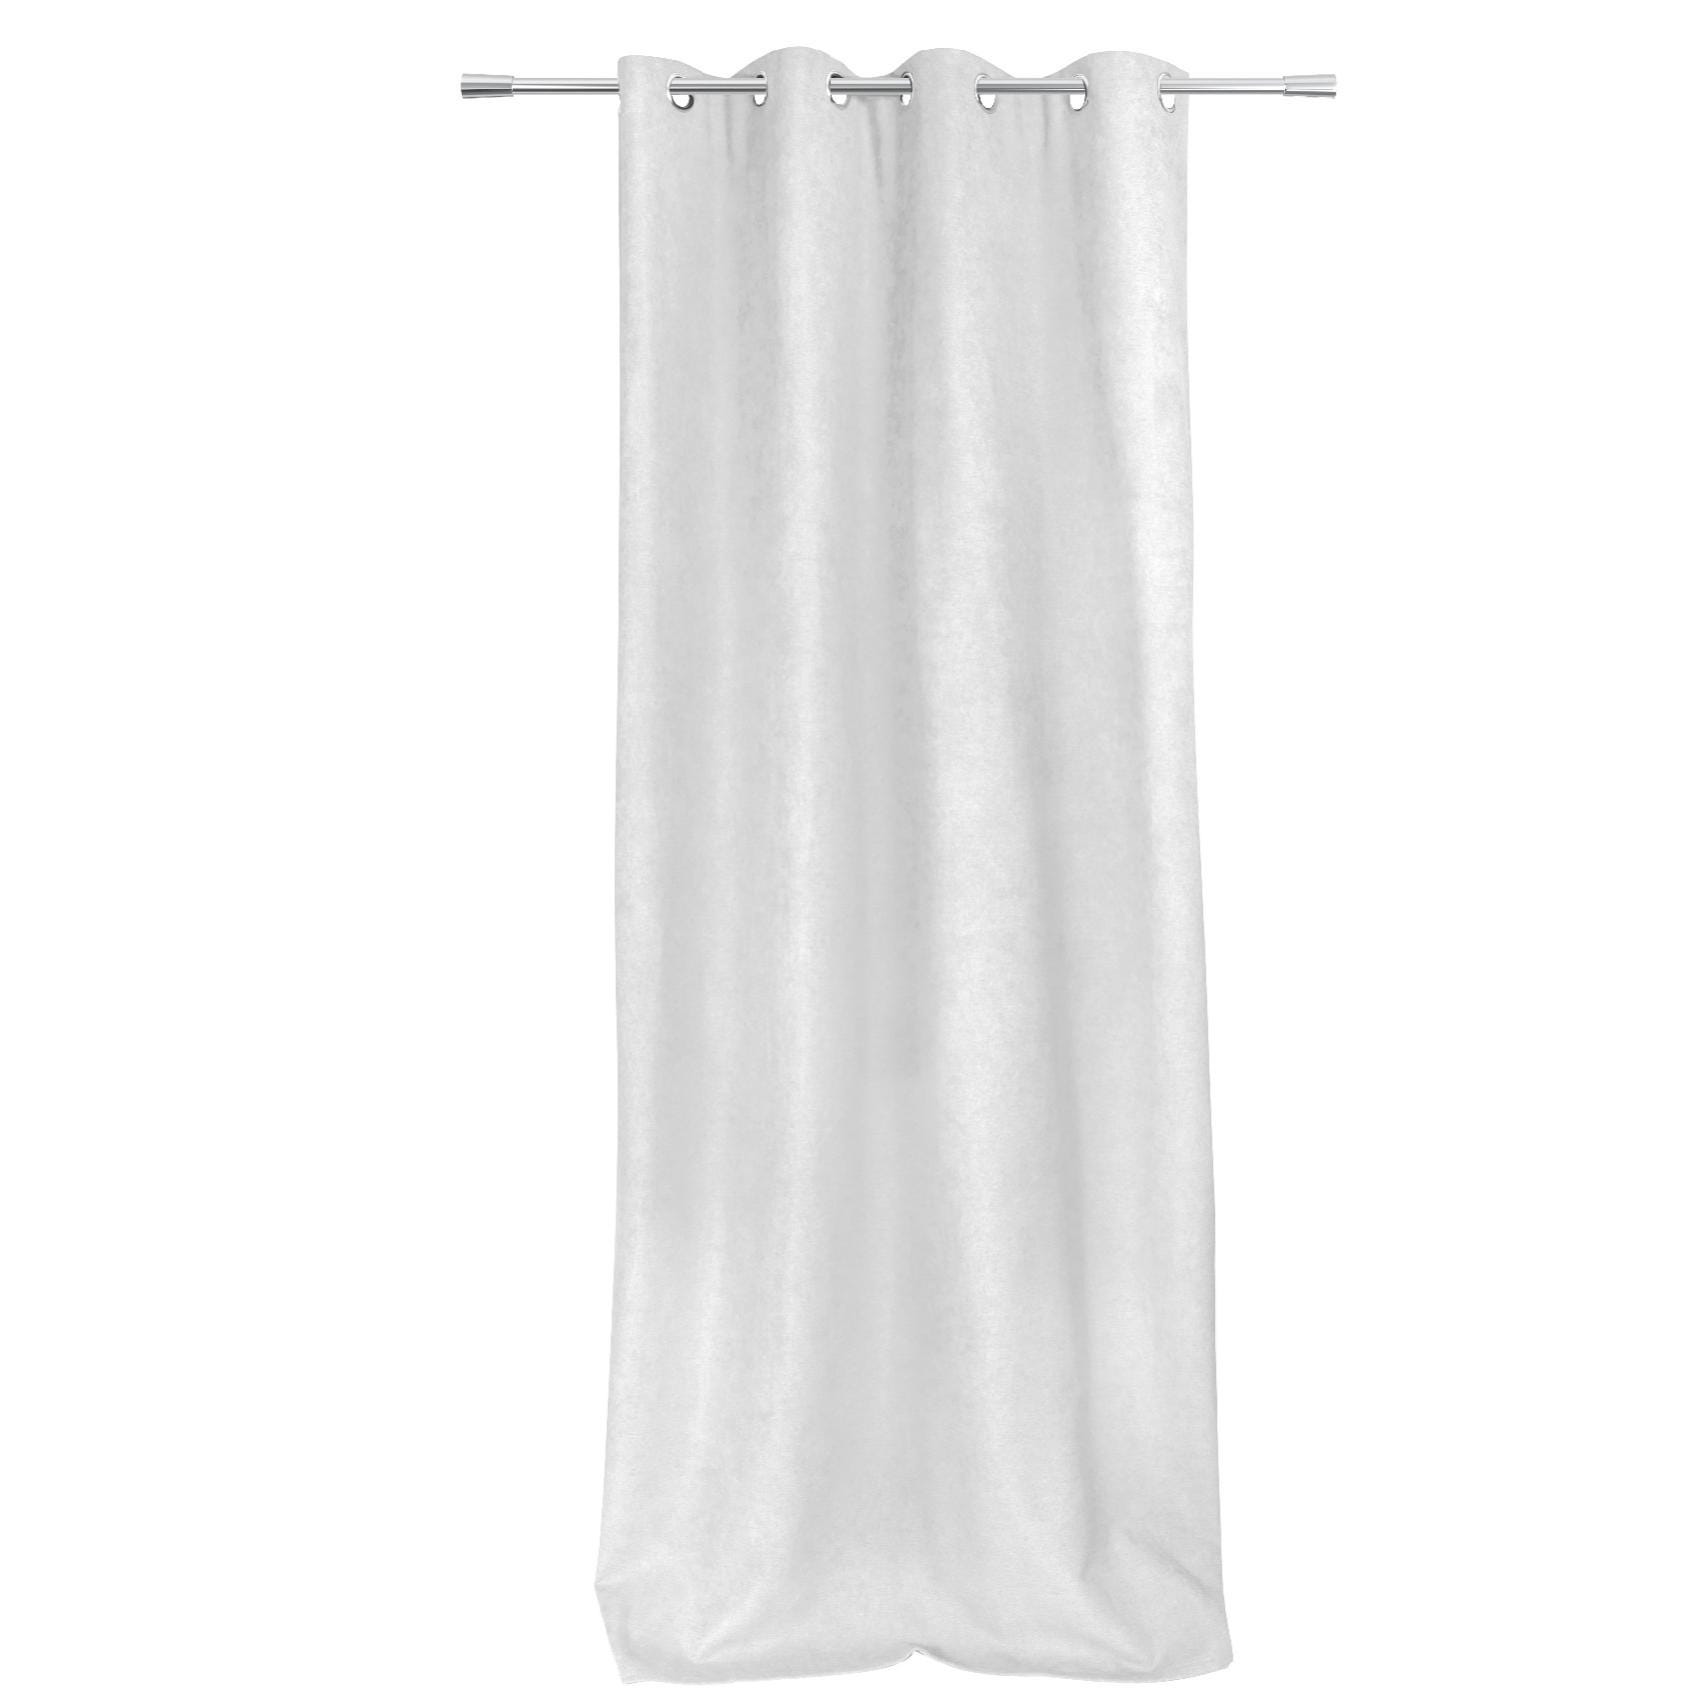 Rideau anti-froid doublé polaire - Blanc - 140x260 cm - Polyester/Occultant